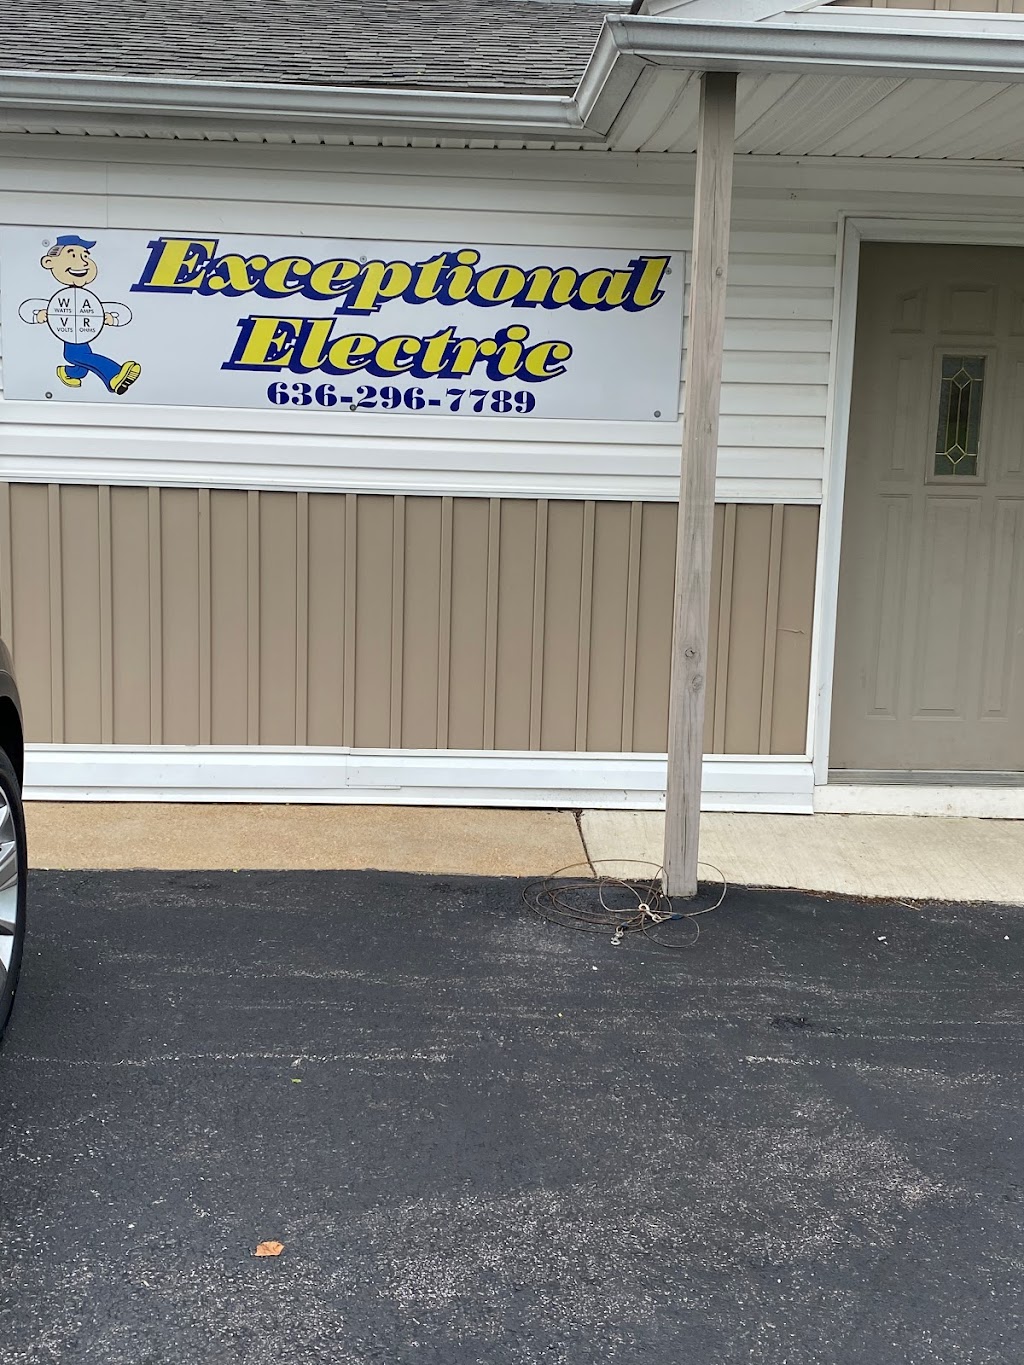 Exceptional Electric | 3613 Telegraph Rd, Arnold, MO 63010, USA | Phone: (636) 296-7789